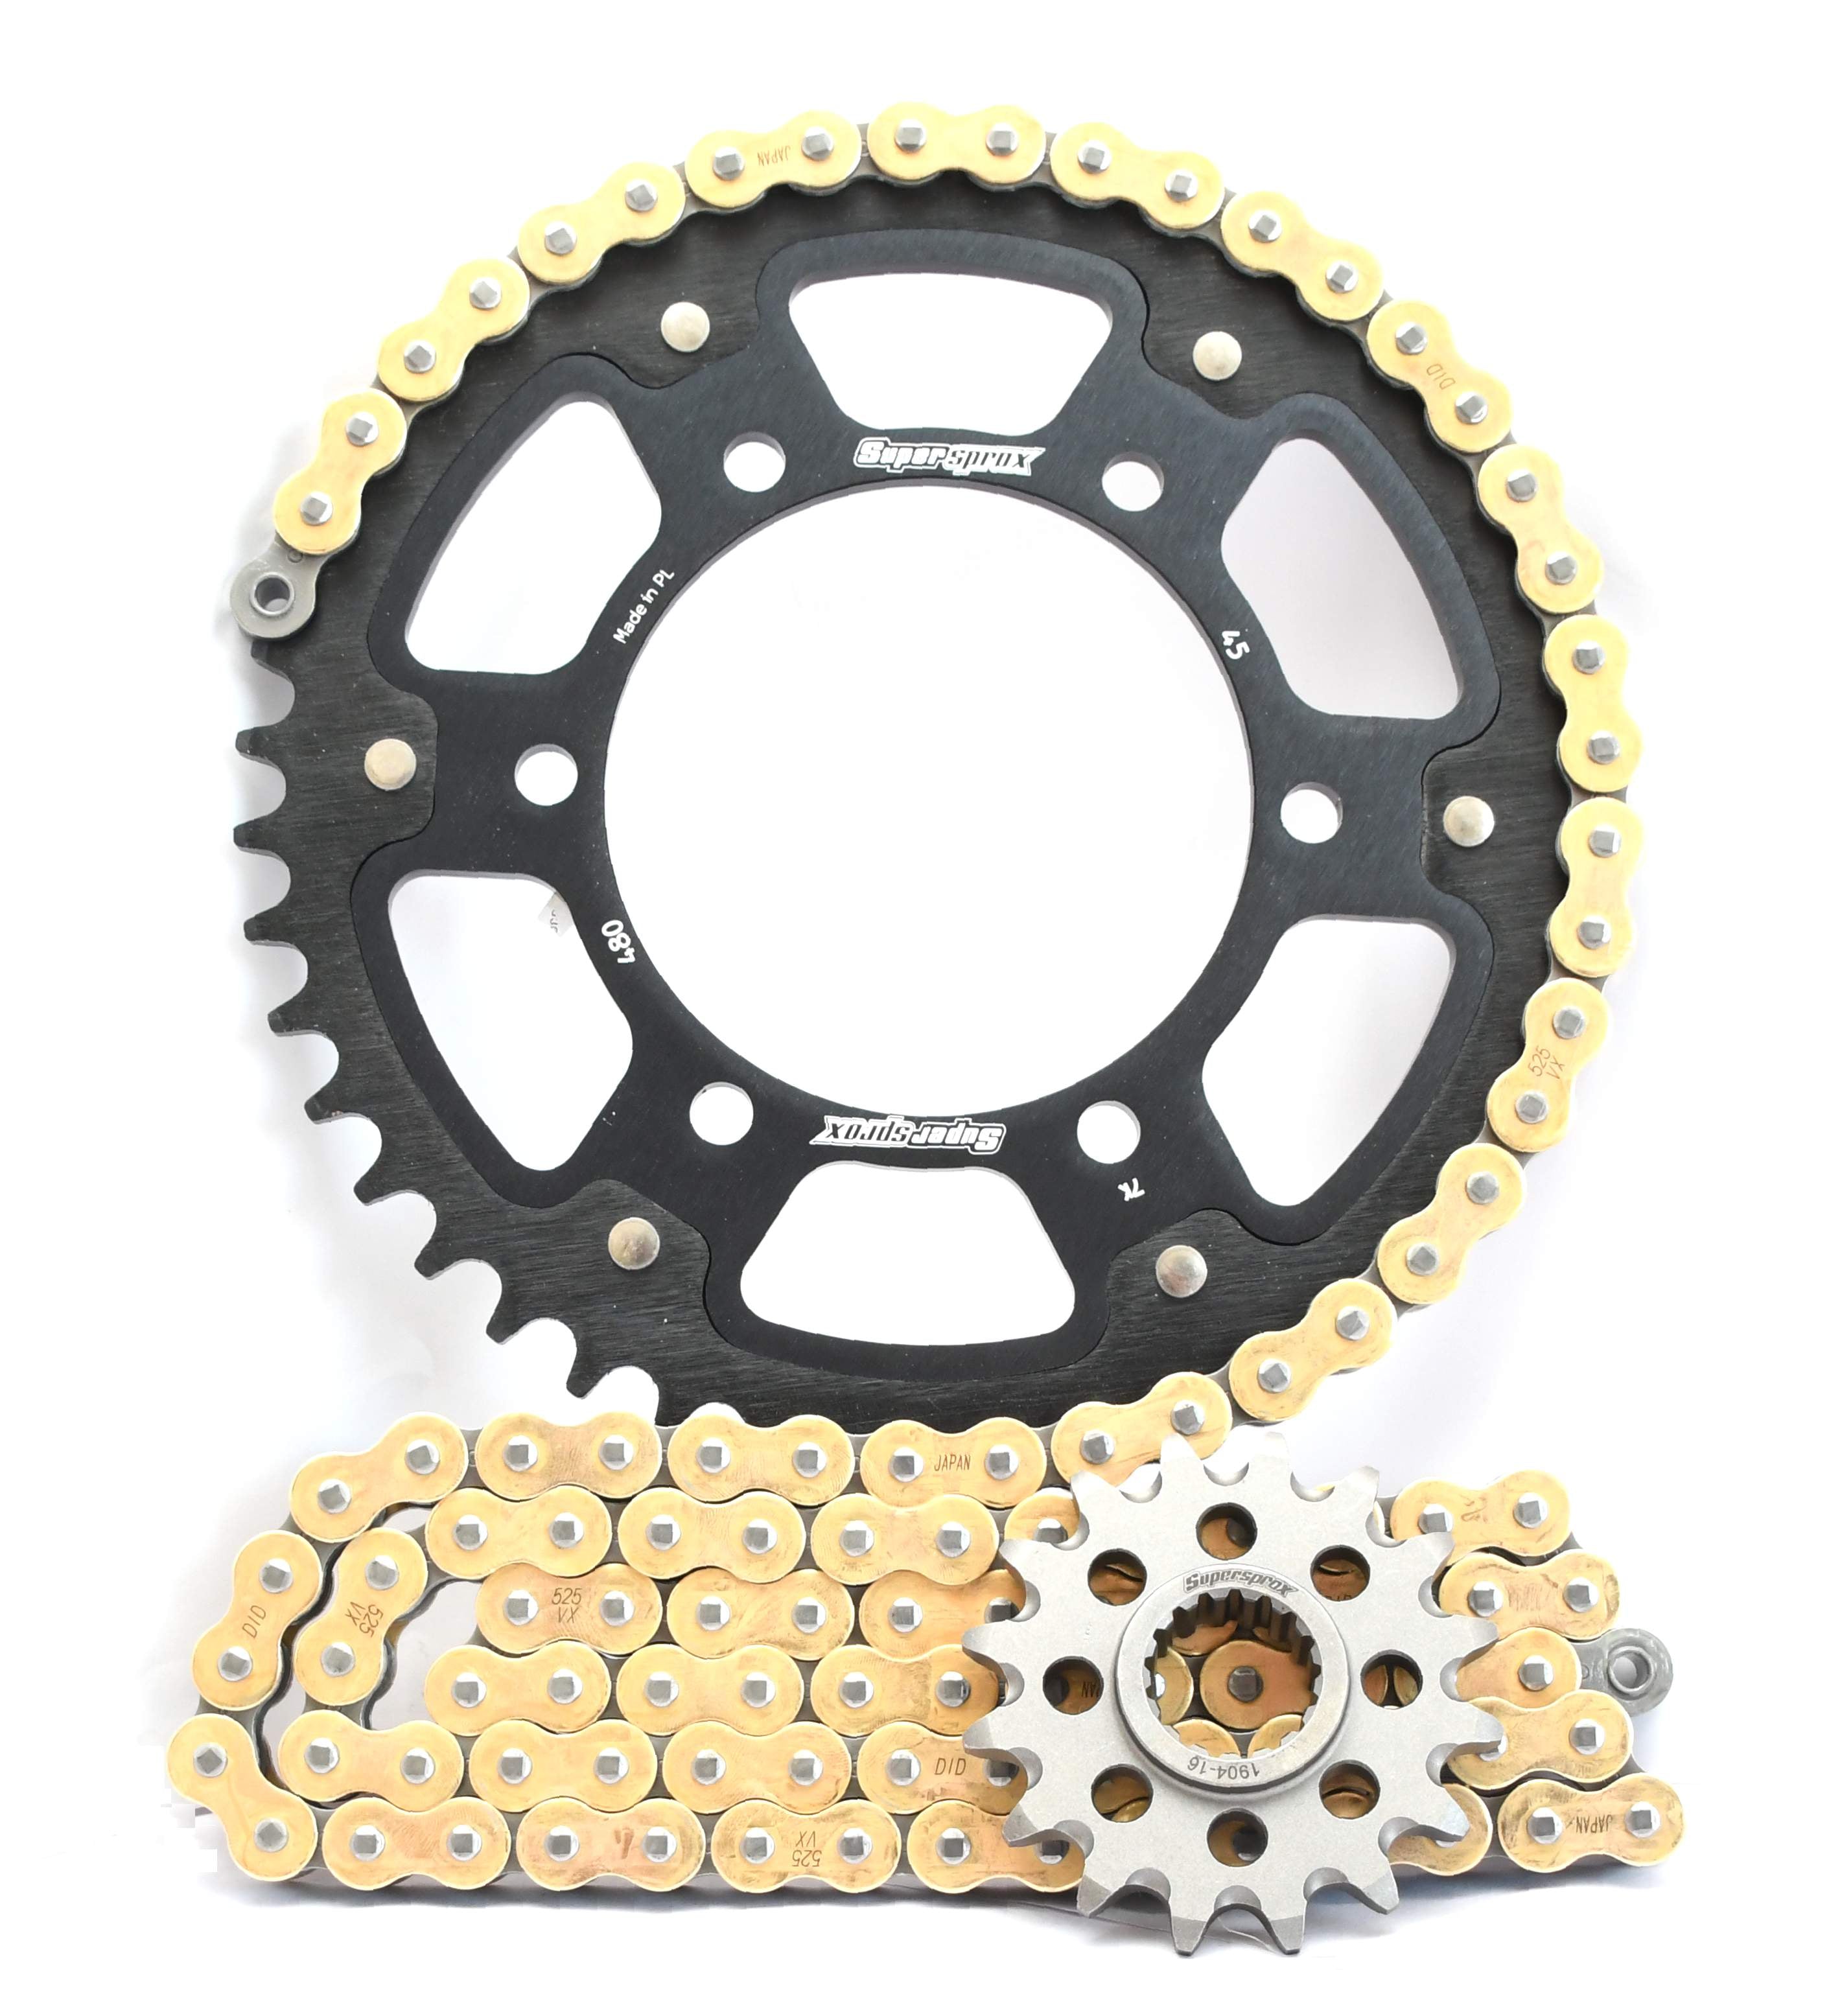 Supersprox Chain & Sprocket Kit for Yamaha YZF R6 2003-2005 - Choose Your Gearing - 530 Conversion